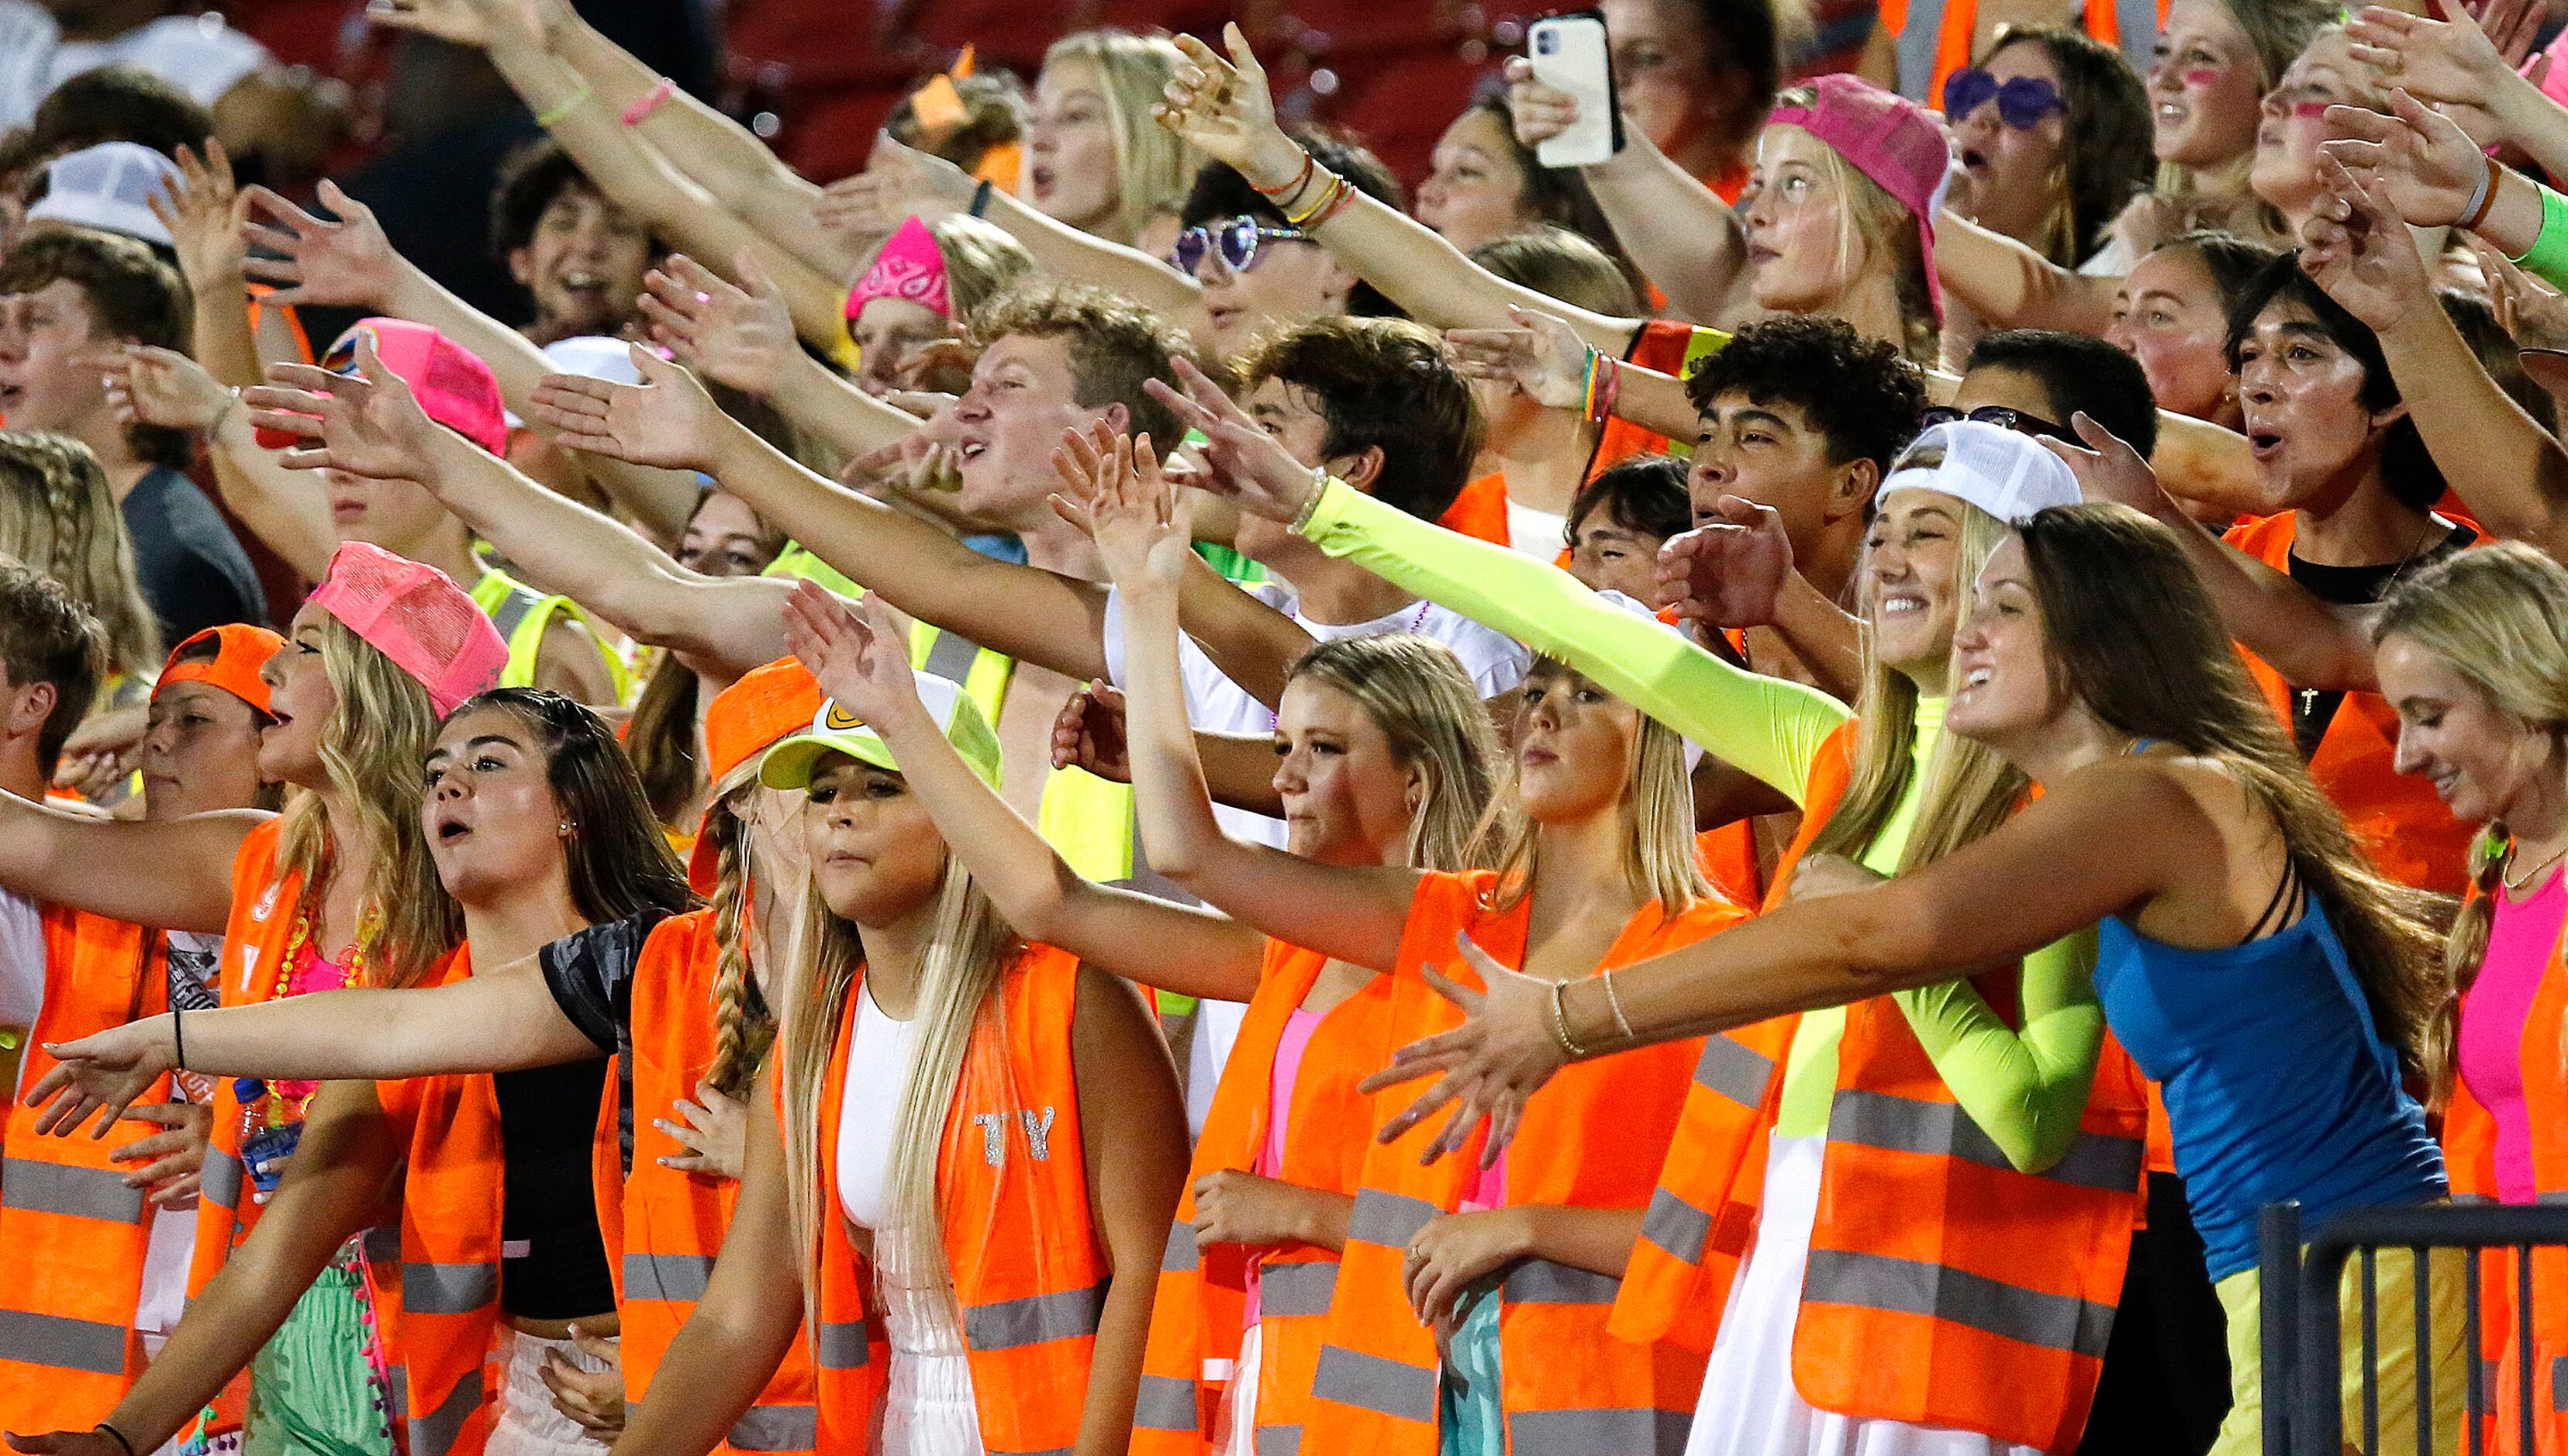 The Aledo High School student section reacts to a play on the field during the first half as...